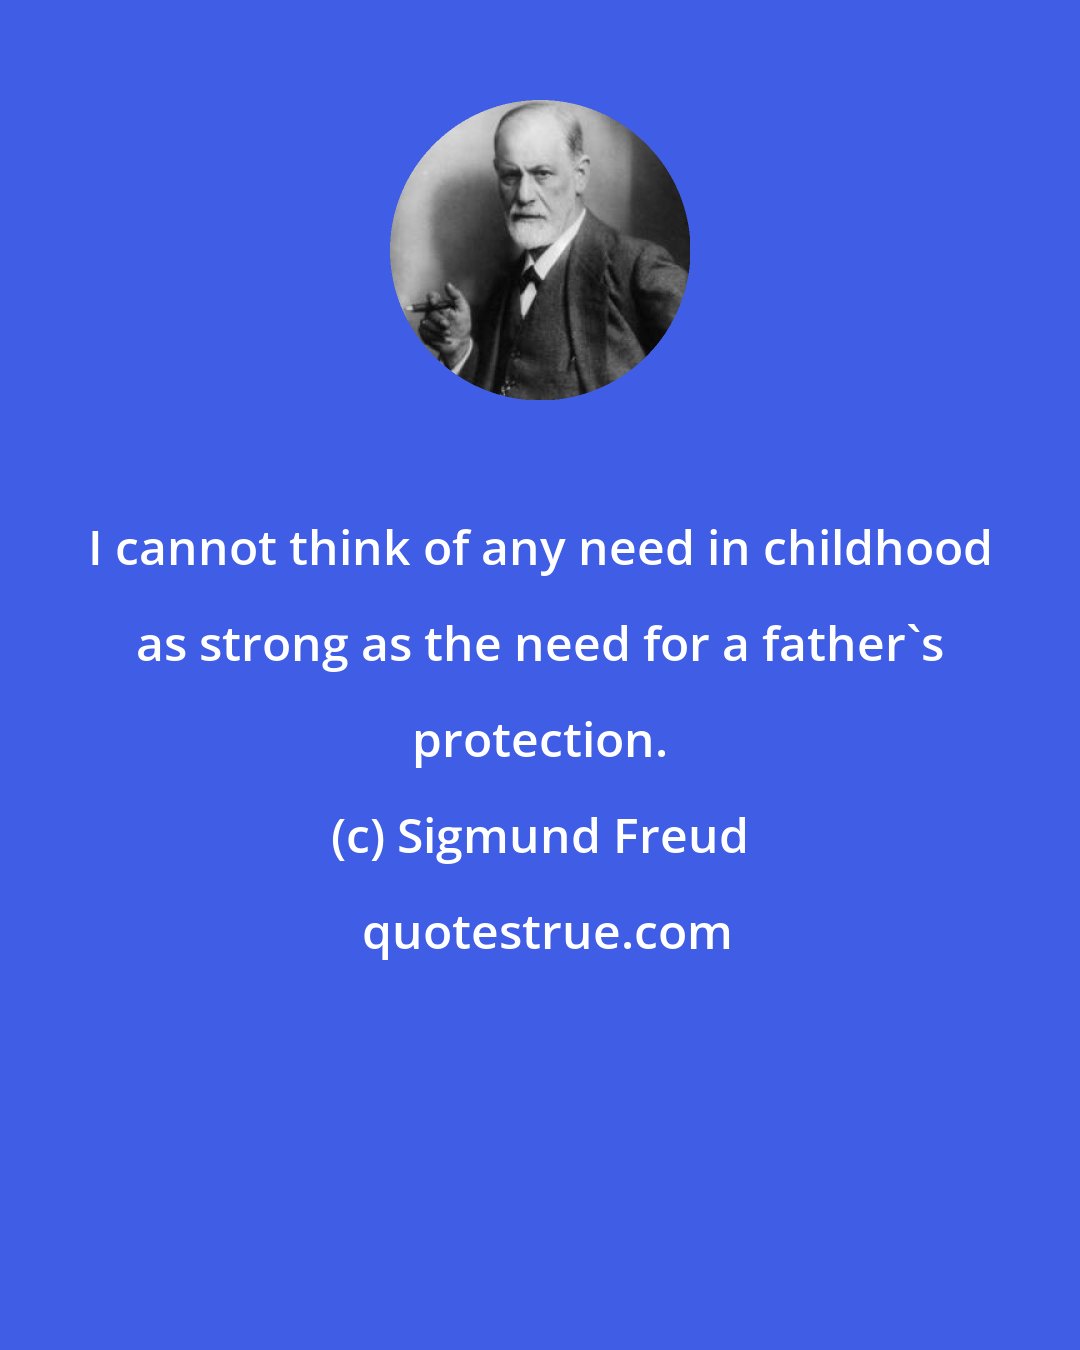 Sigmund Freud: I cannot think of any need in childhood as strong as the need for a father's protection.